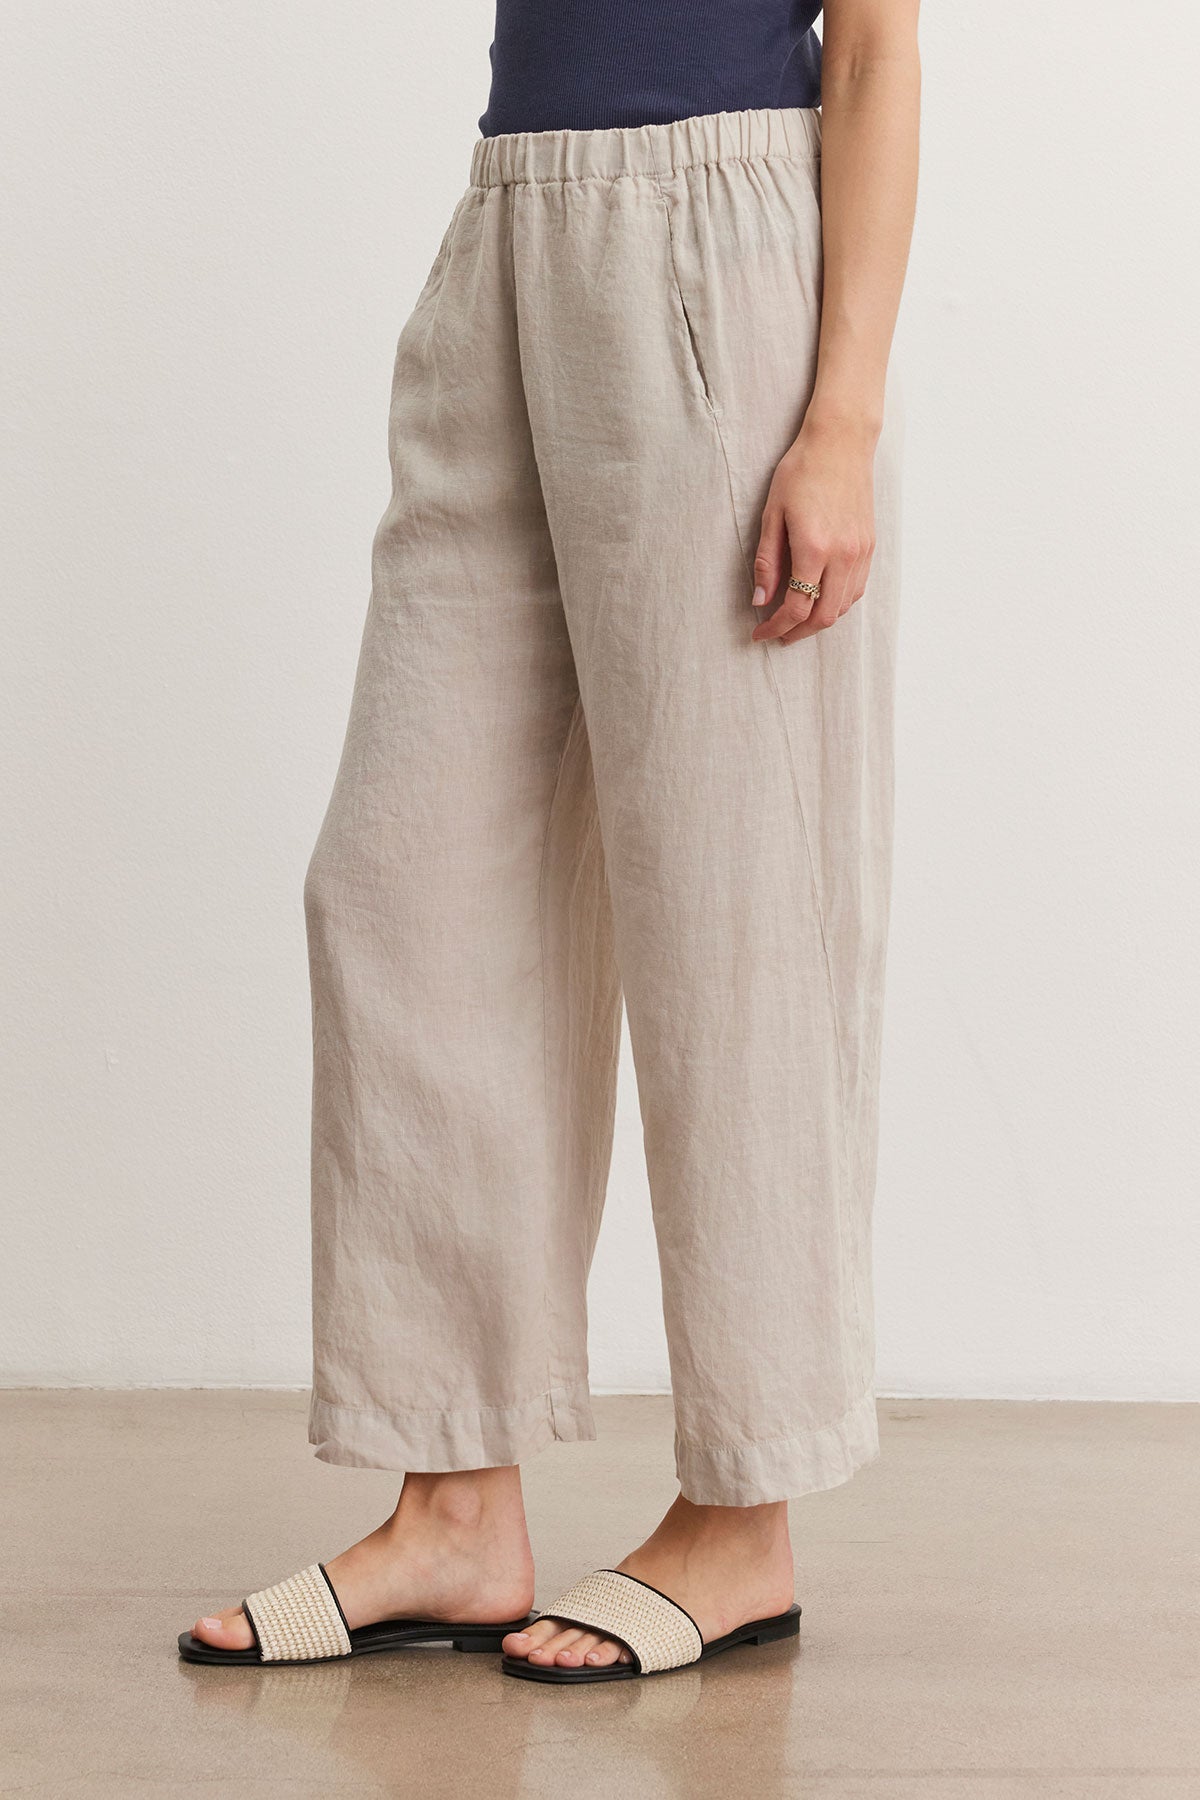   Person wearing Velvet by Graham & Spencer's LOLA LINEN PANT with pockets, a dark-colored top, and black-and-beige sandals. They are standing on a light-colored floor, with the focus on the lower half of their body. 